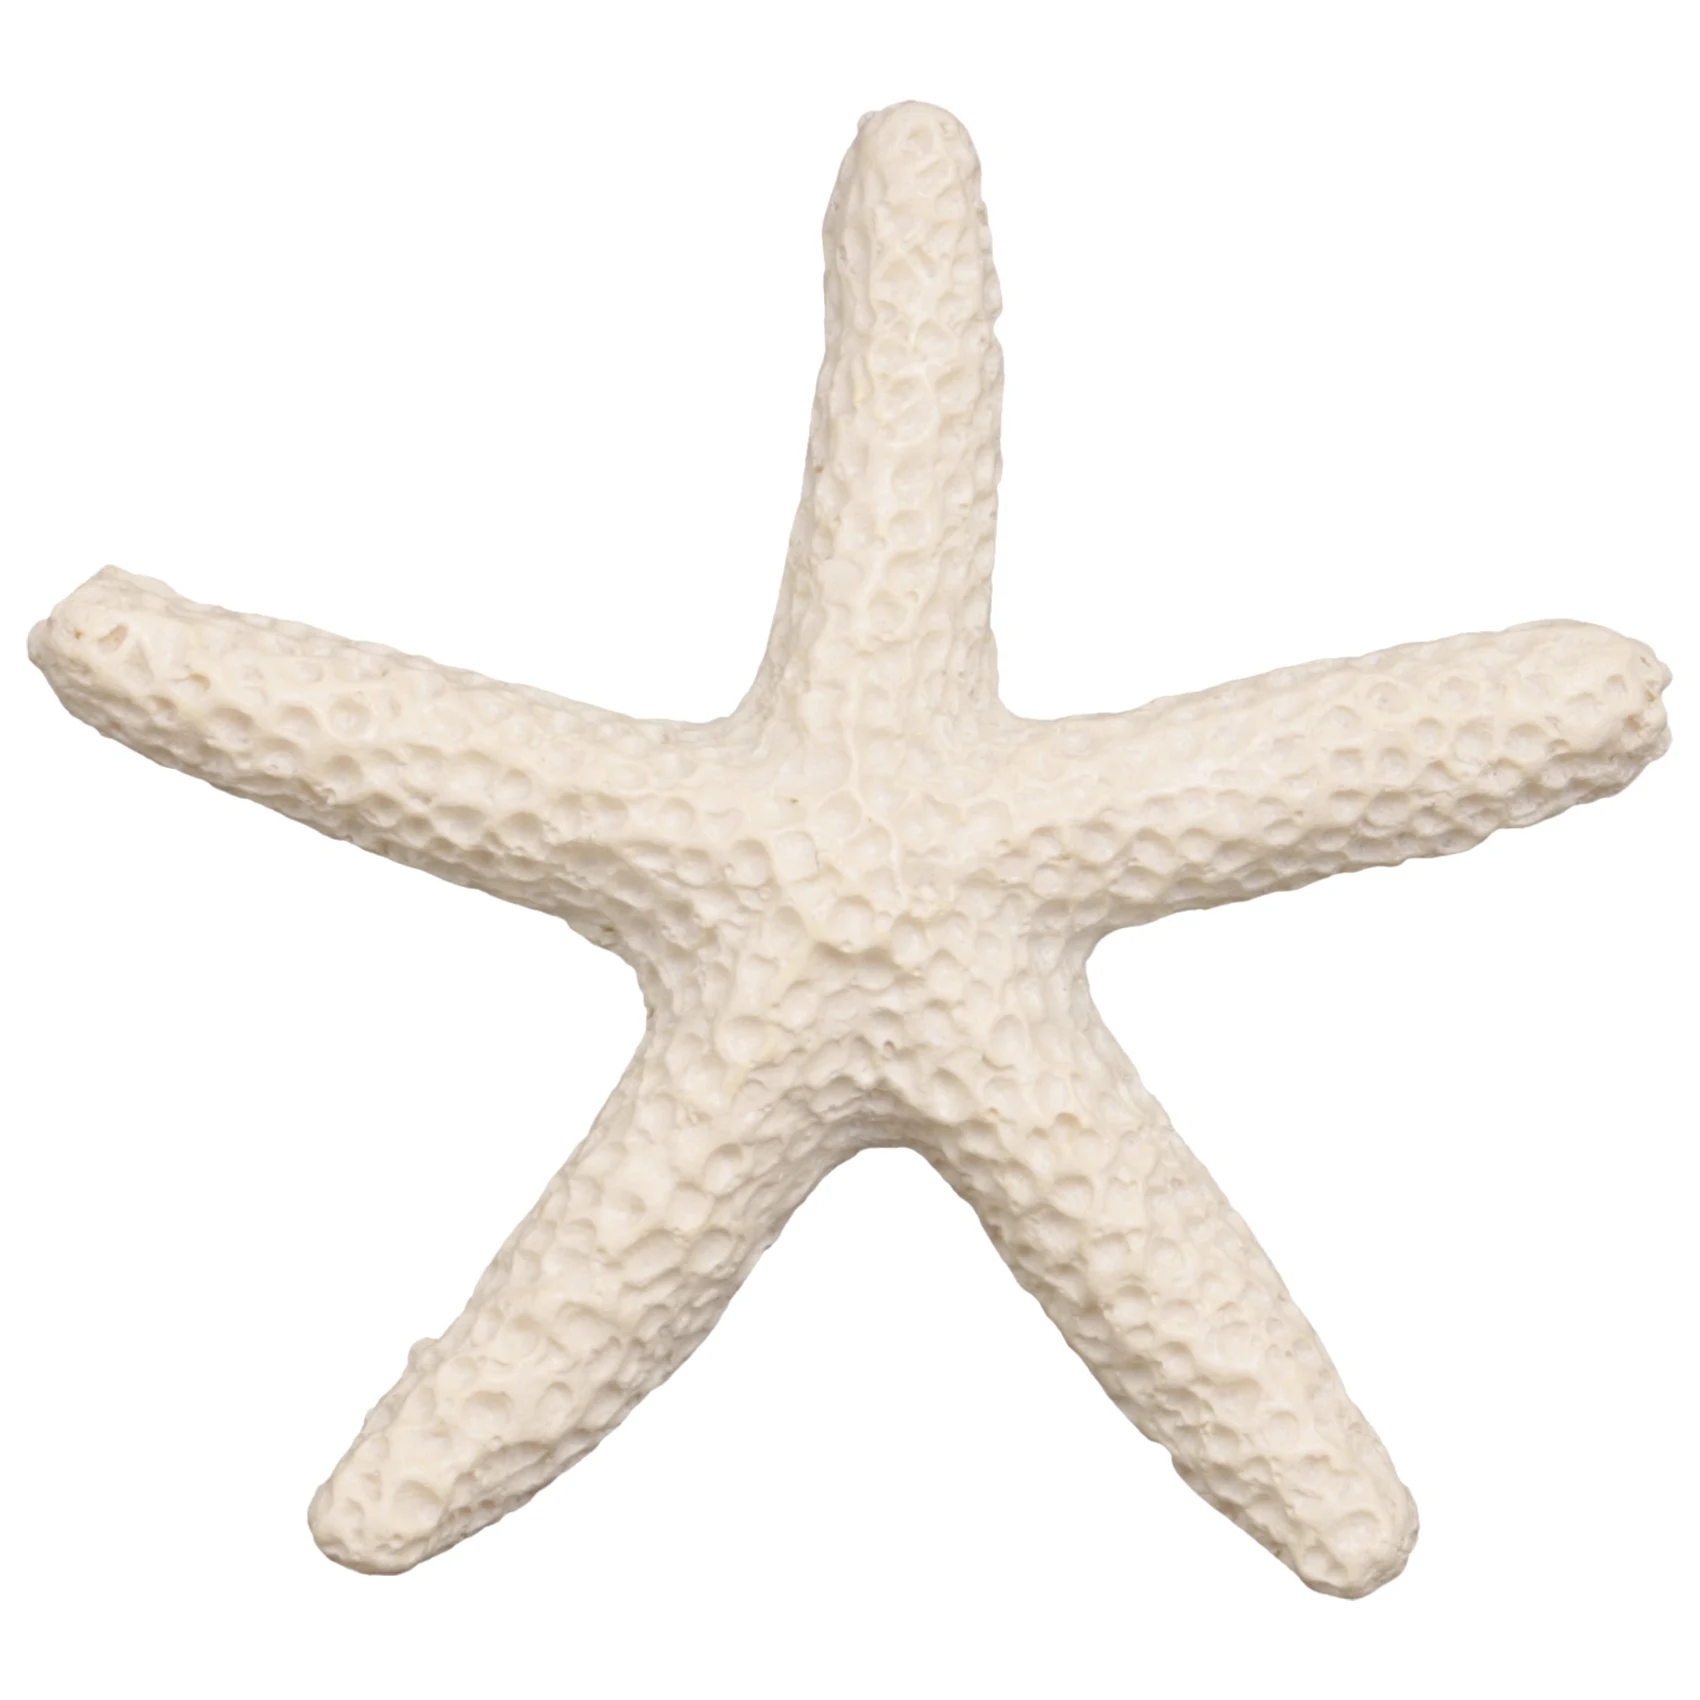 

15 Pieces creamy-white Pencil Finger Starfish For Wedding Decor, Home Decor And Craft Project